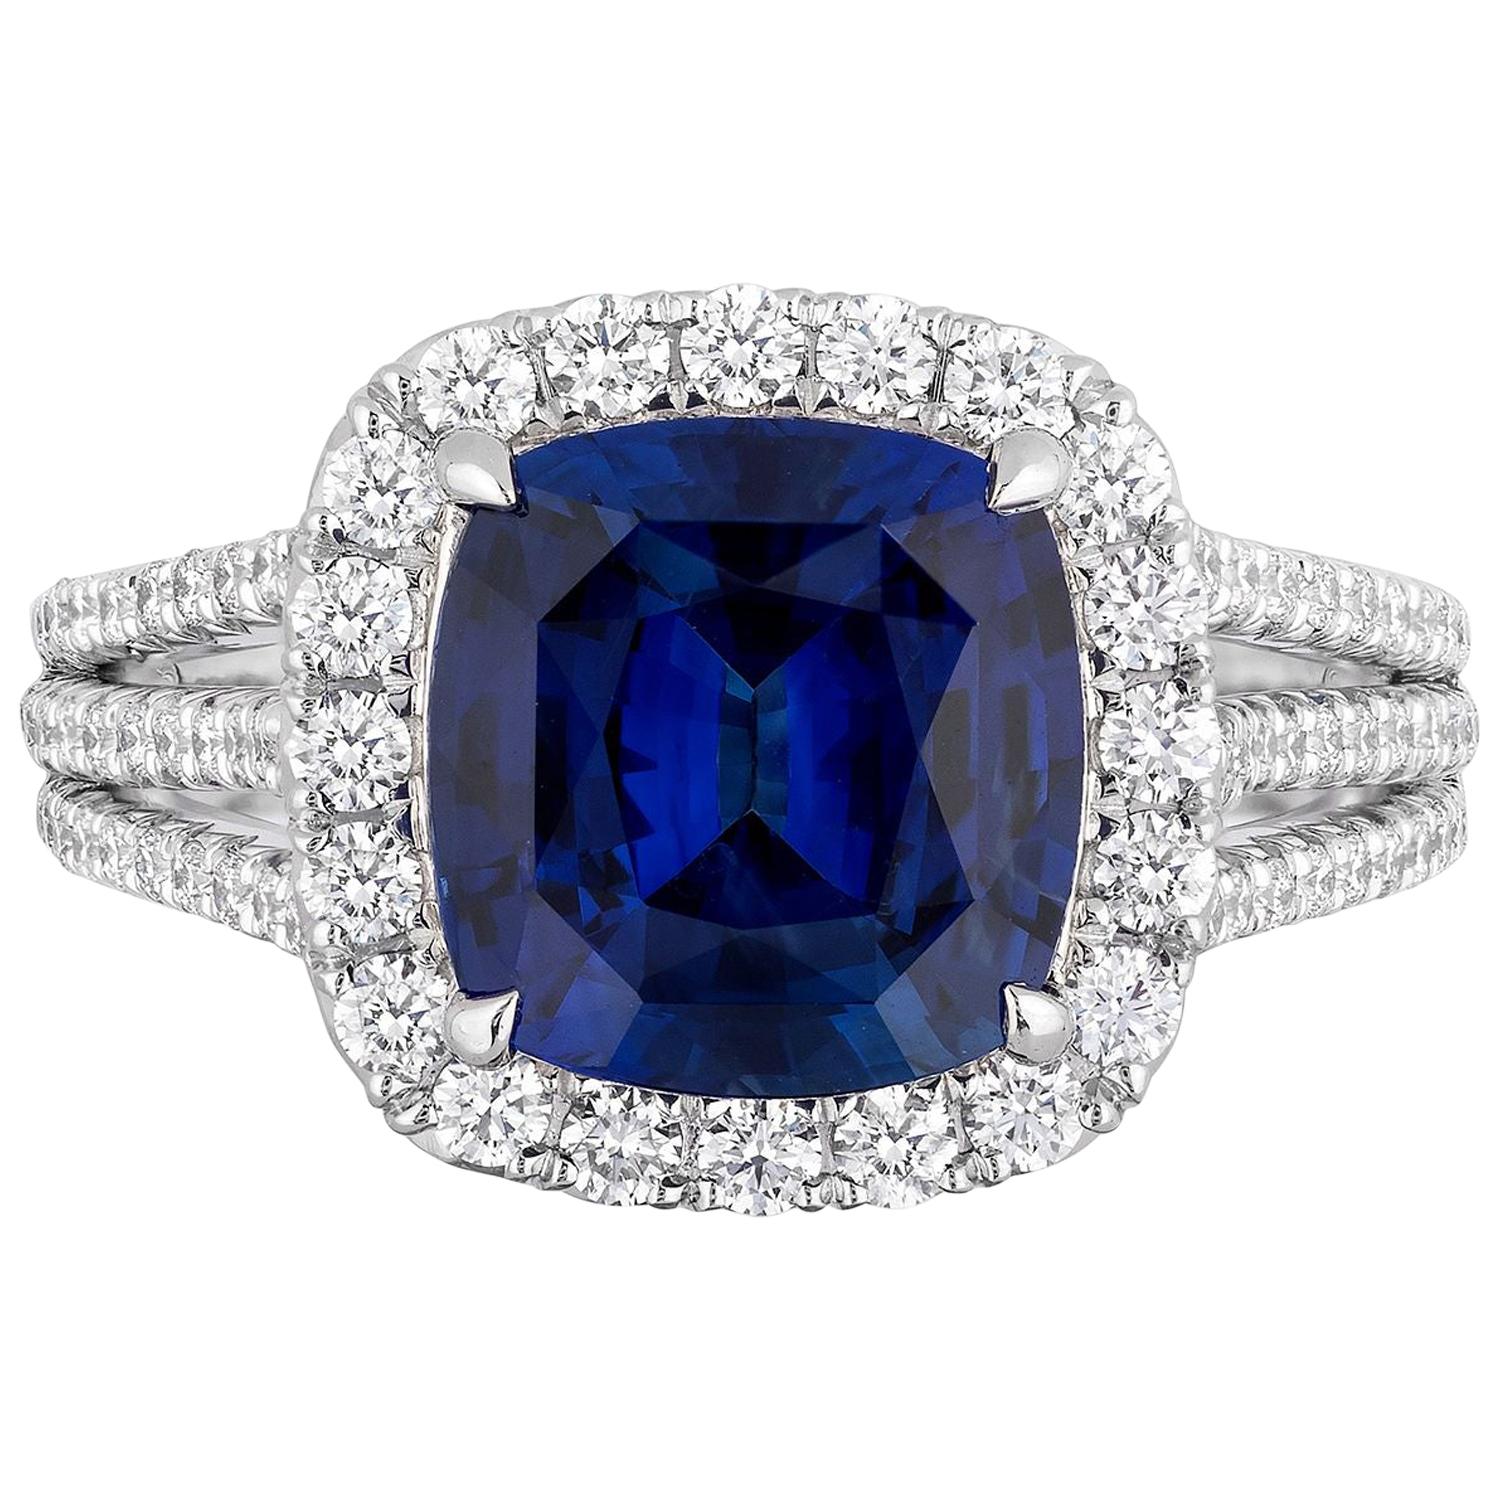 CDC LAB Certified 4.11 Carat Cushion Royal Blue Sapphire Diamond Cocktail Ring For Sale